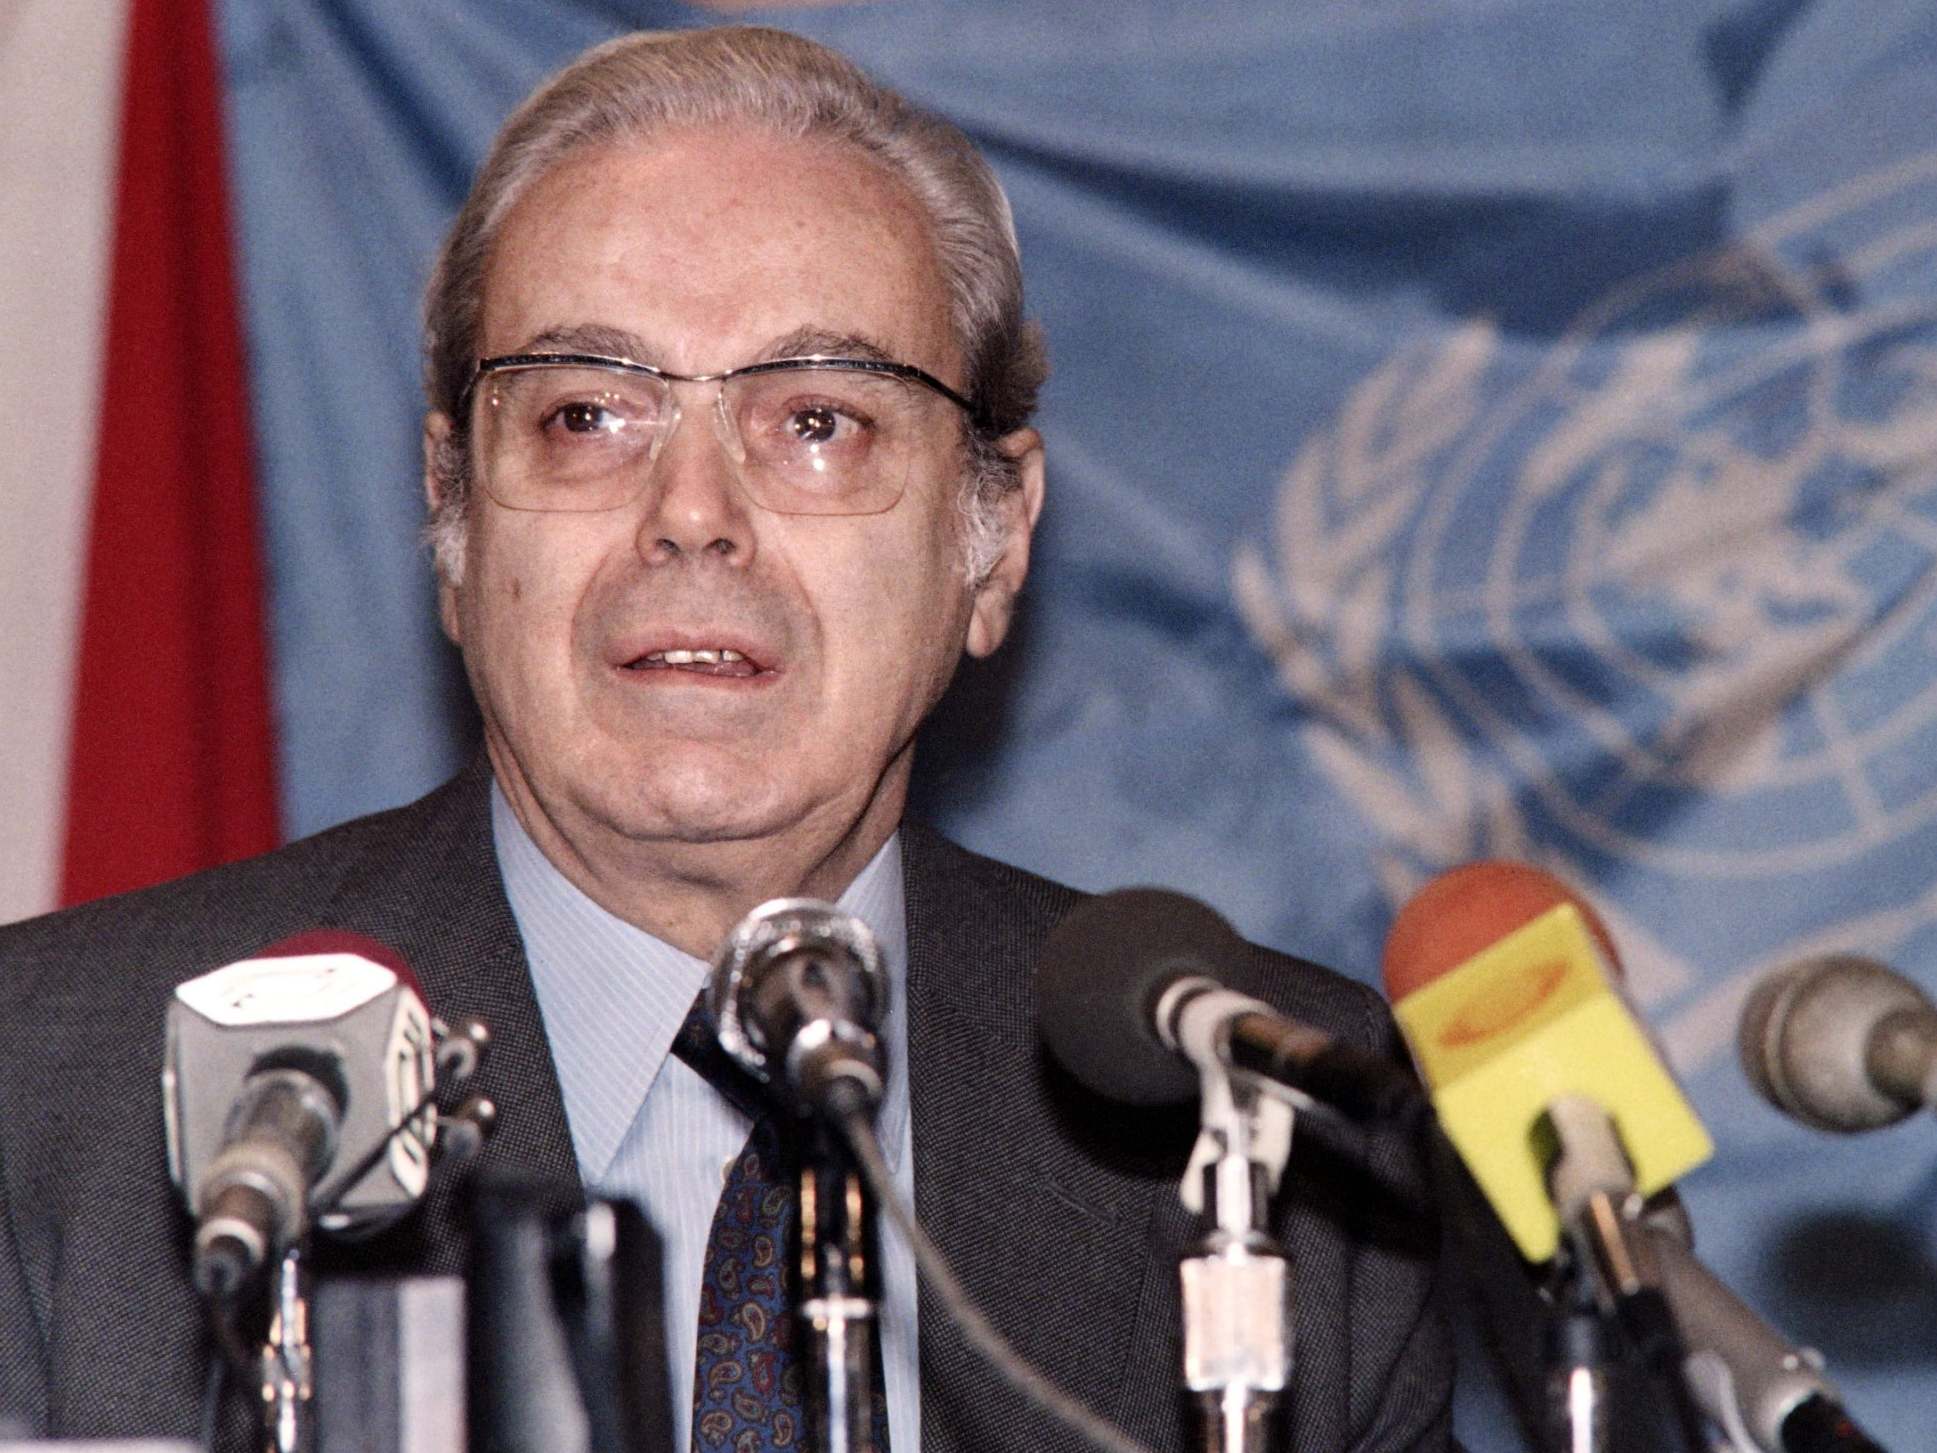 The ambassador's most enduring legacy was the work he did with peacemakers to forge a deal to end the Iran-Iraq war